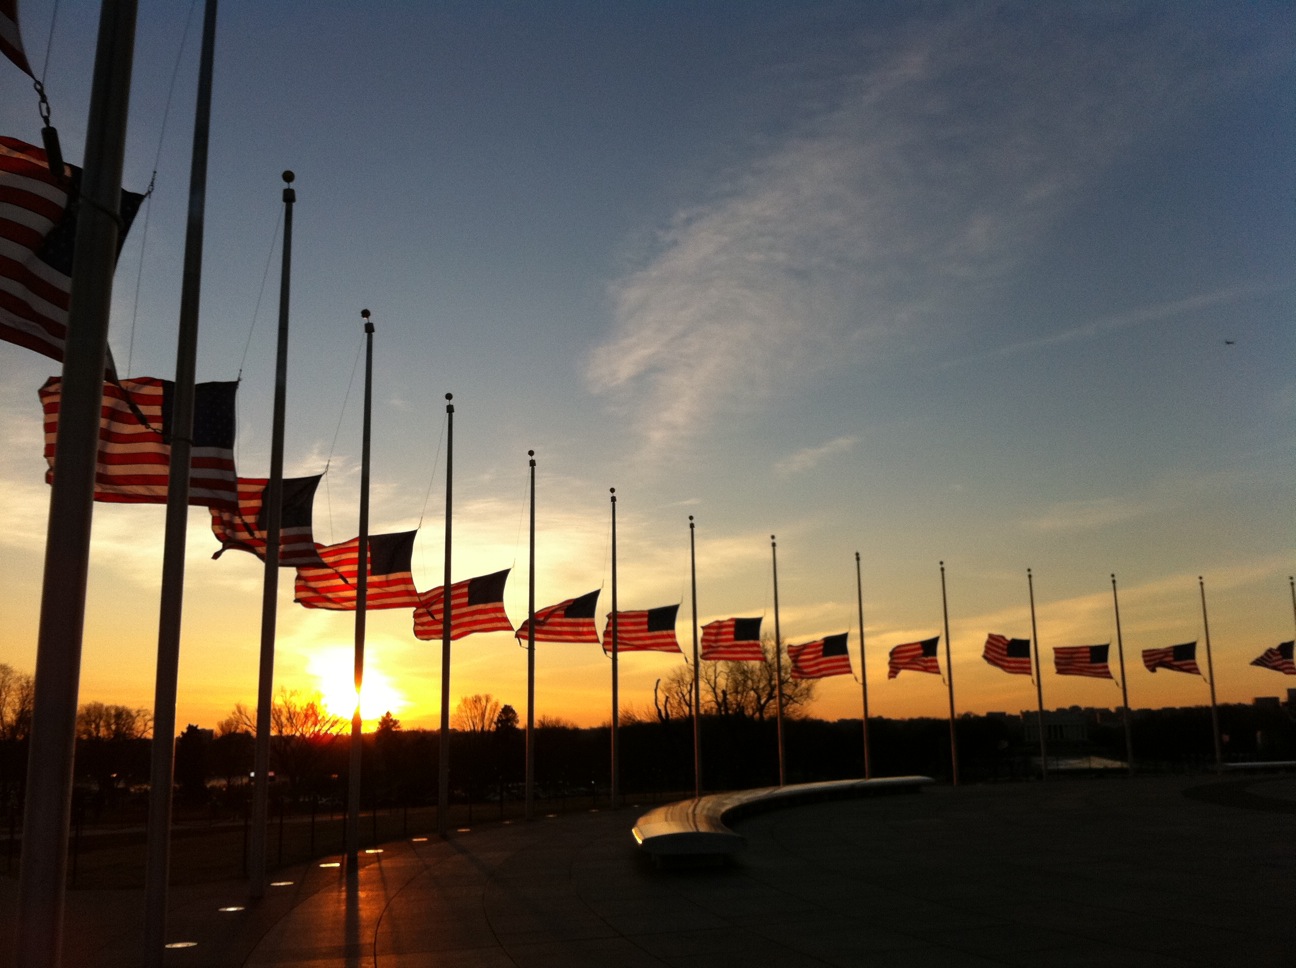 Flag Flying Days during 2019 – Full and Half-Staff Flag Holidays1296 x 968